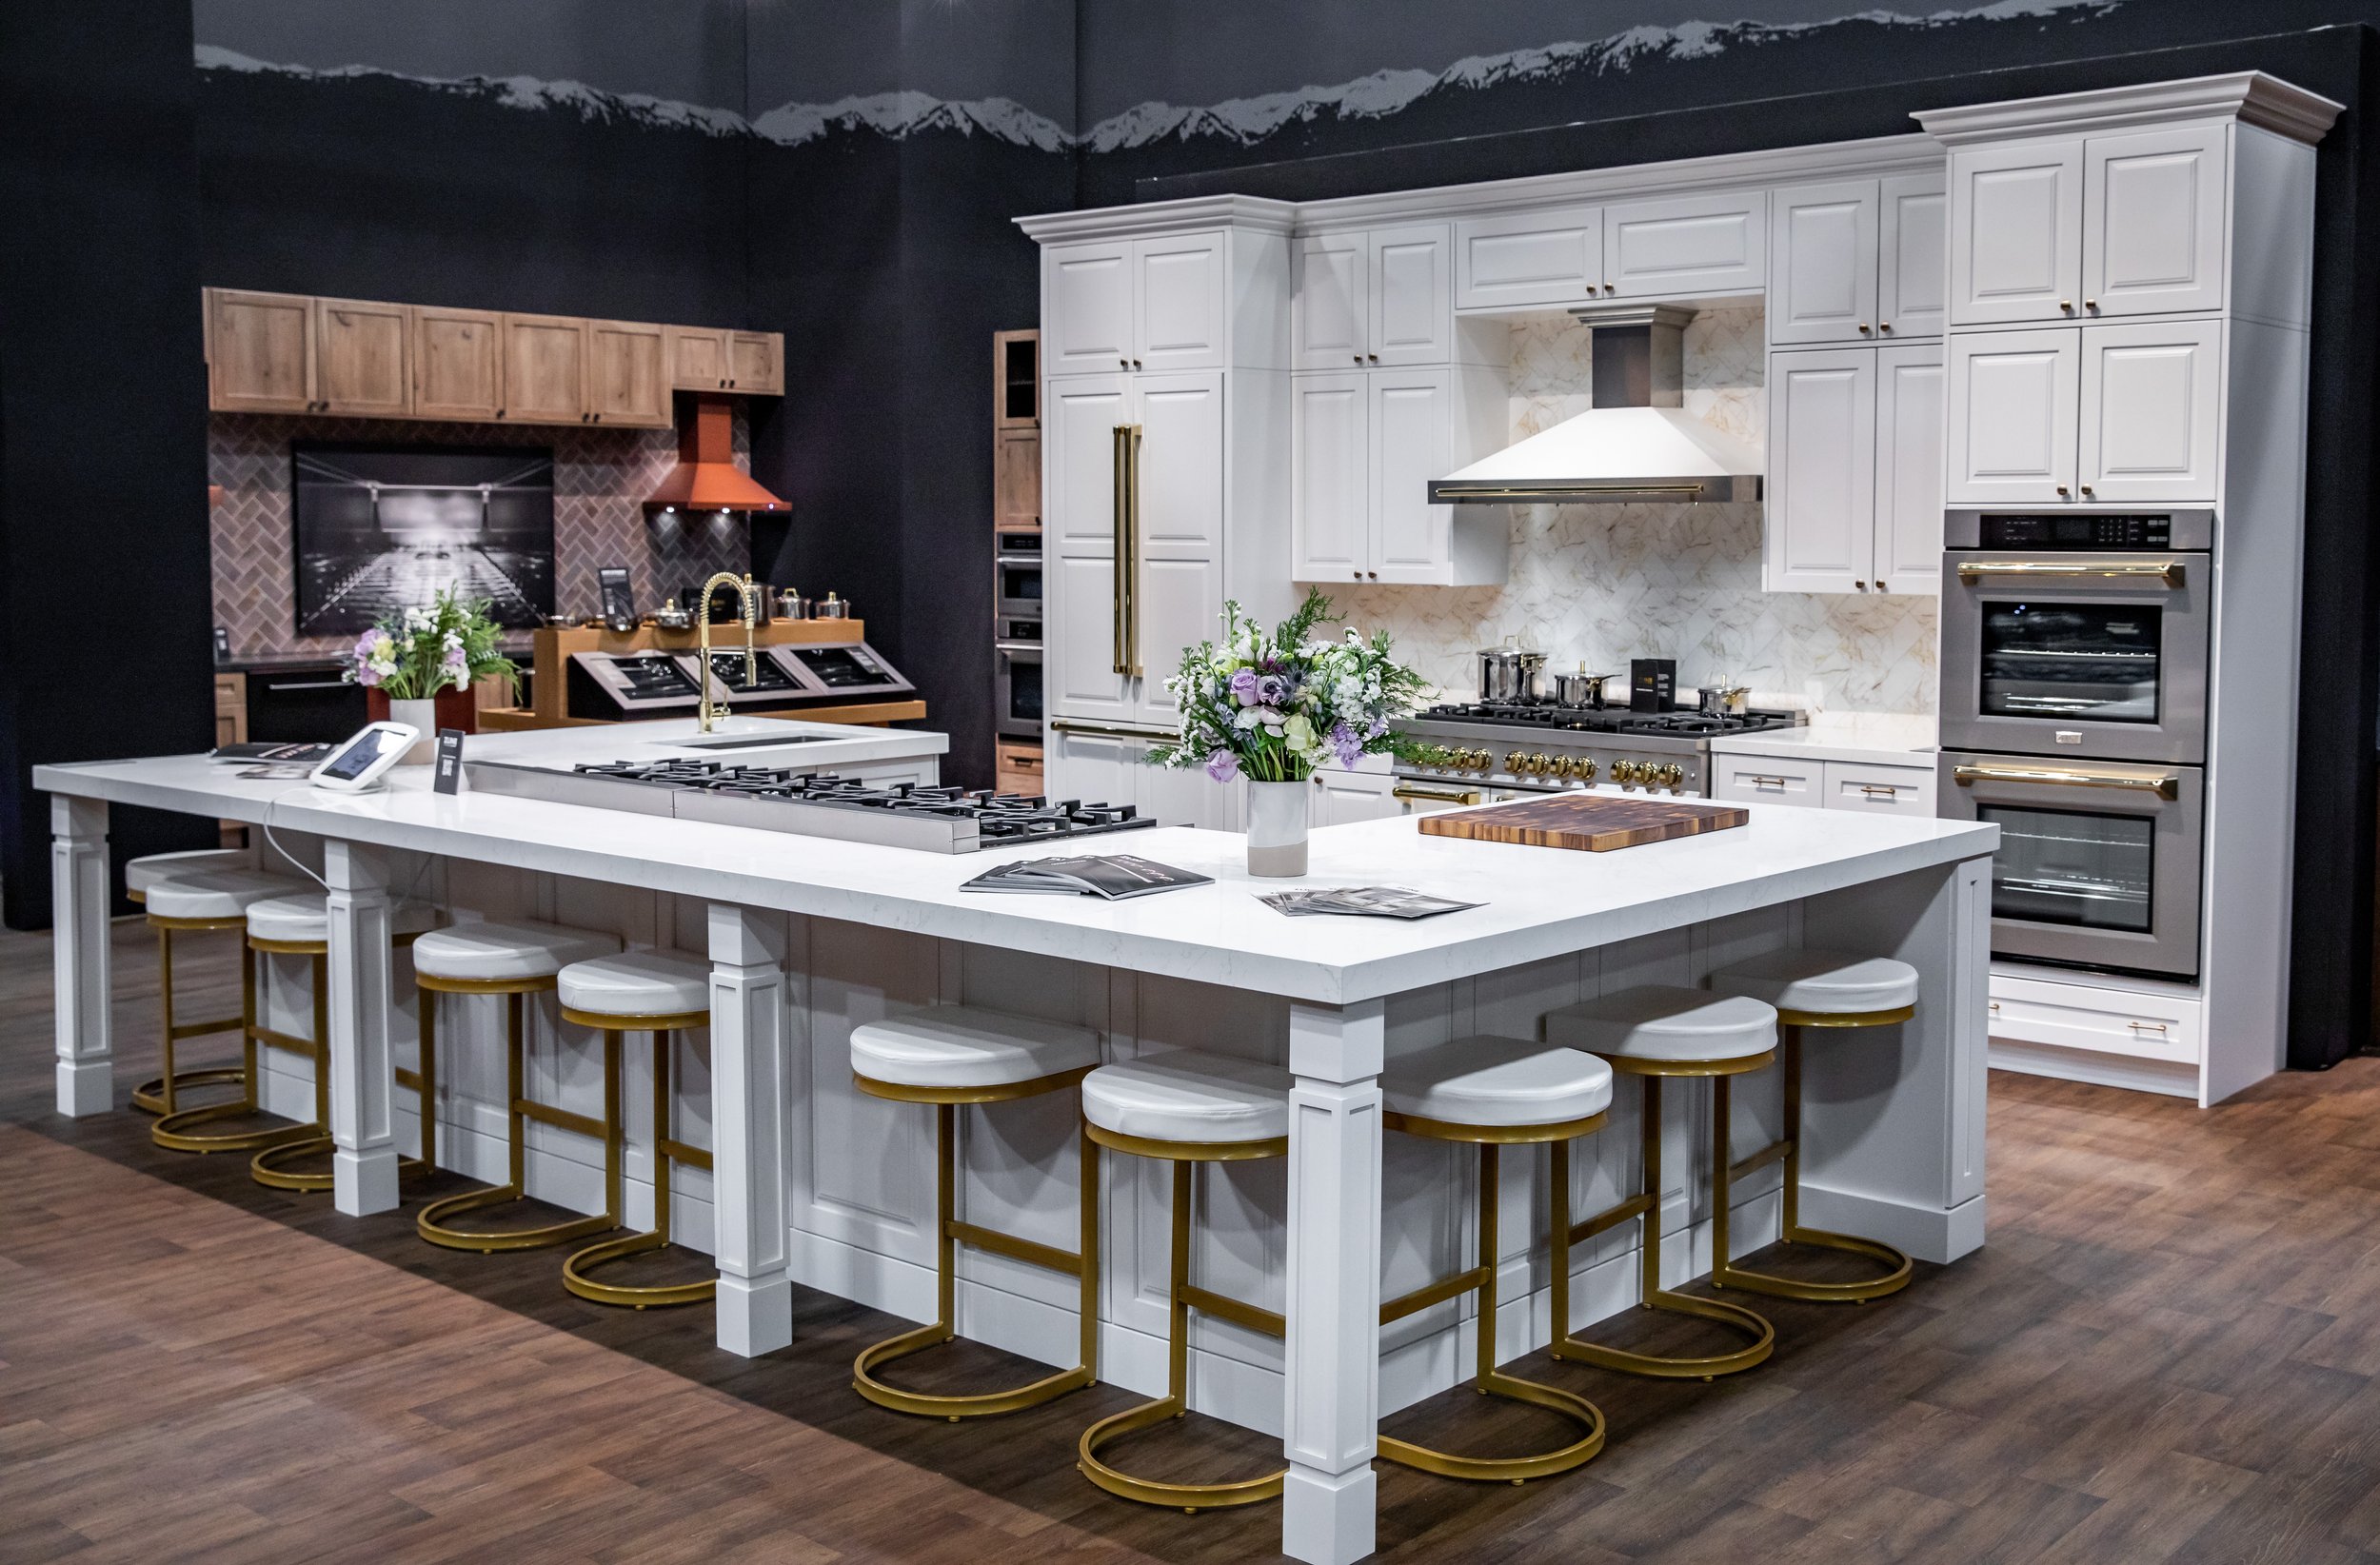 FOTILE TO DEBUT NEW AND INNOVATIVE KITCHEN APPLIANCES AT KBIS 2023